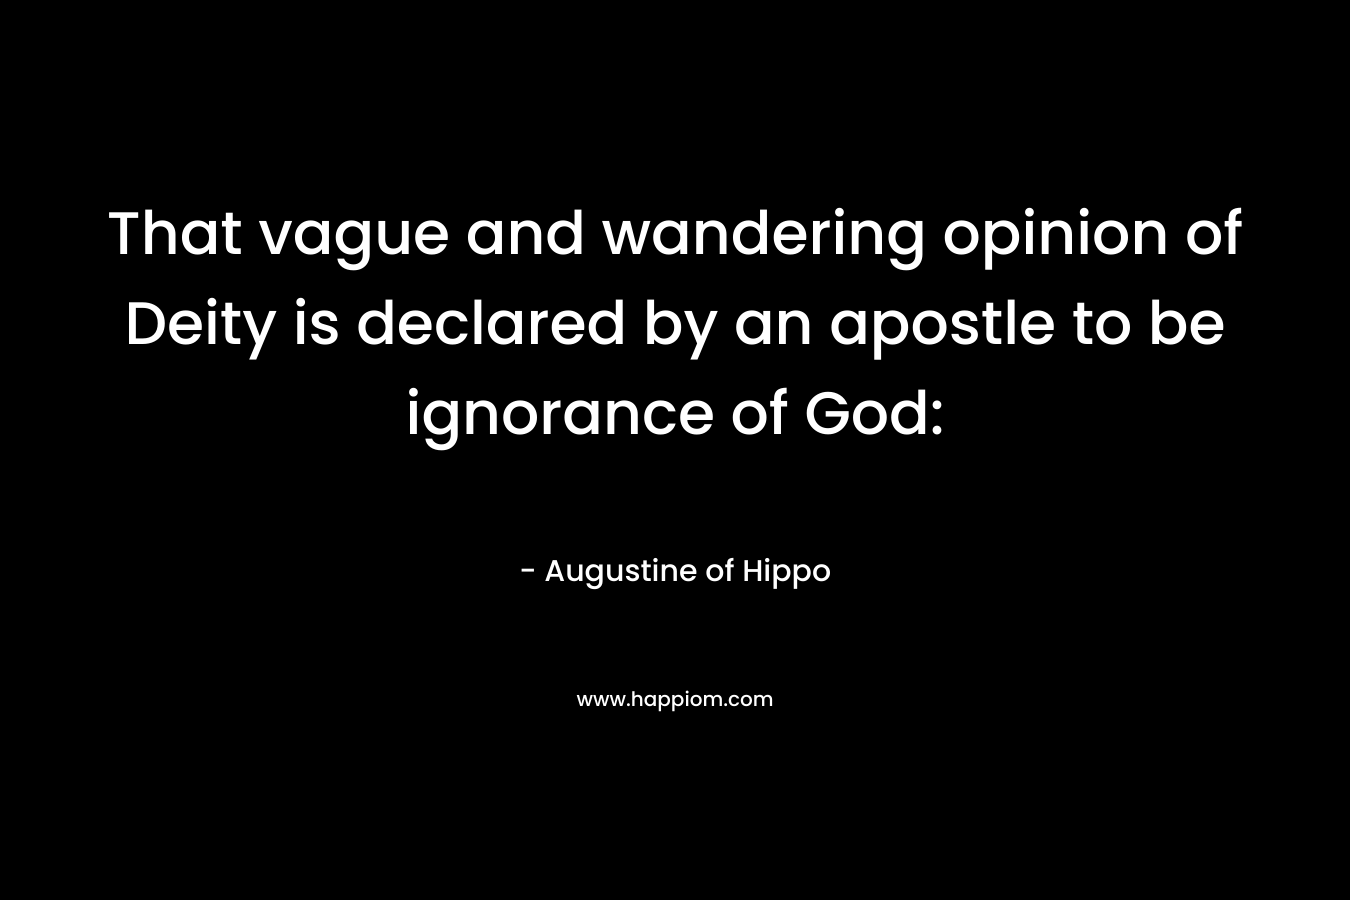 That vague and wandering opinion of Deity is declared by an apostle to be ignorance of God: – Augustine of Hippo